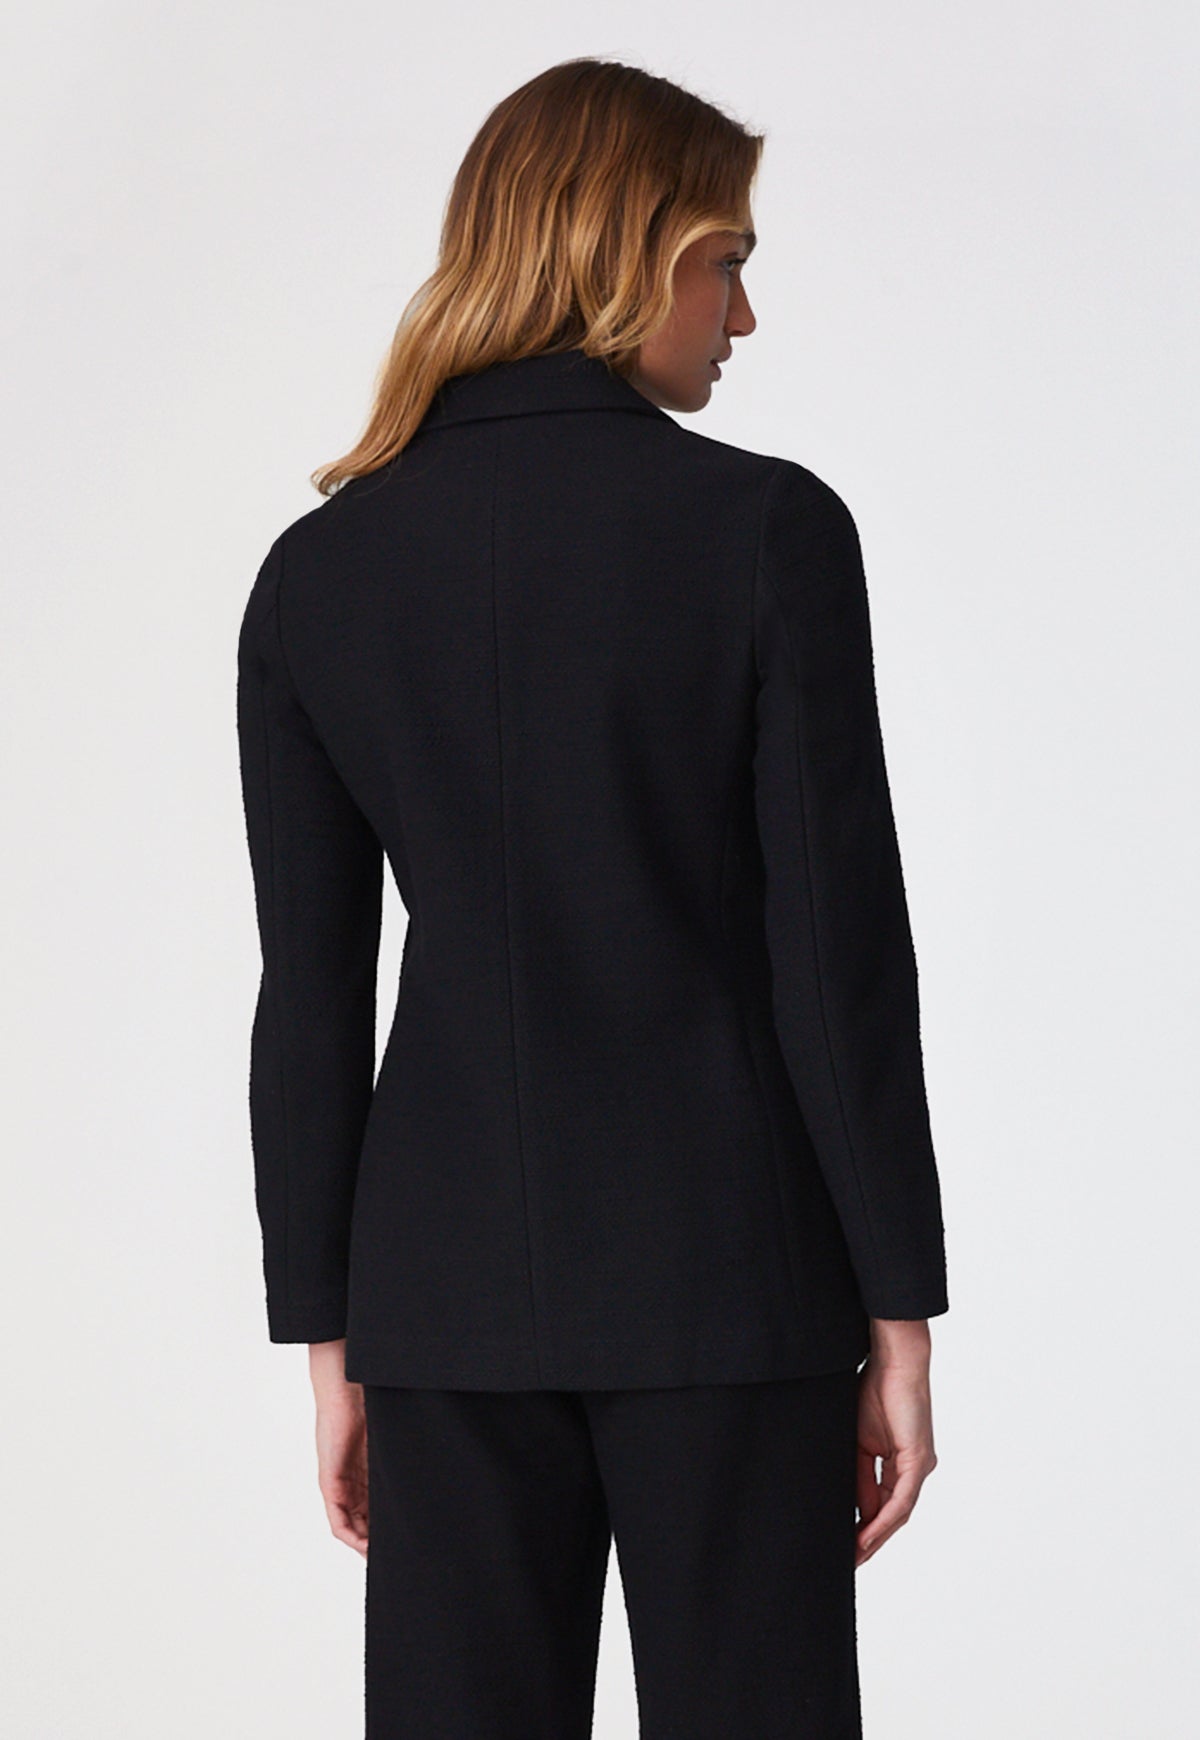 THE DOUBLE BREASTED JACKET in BLACK TEXTURED COTTON